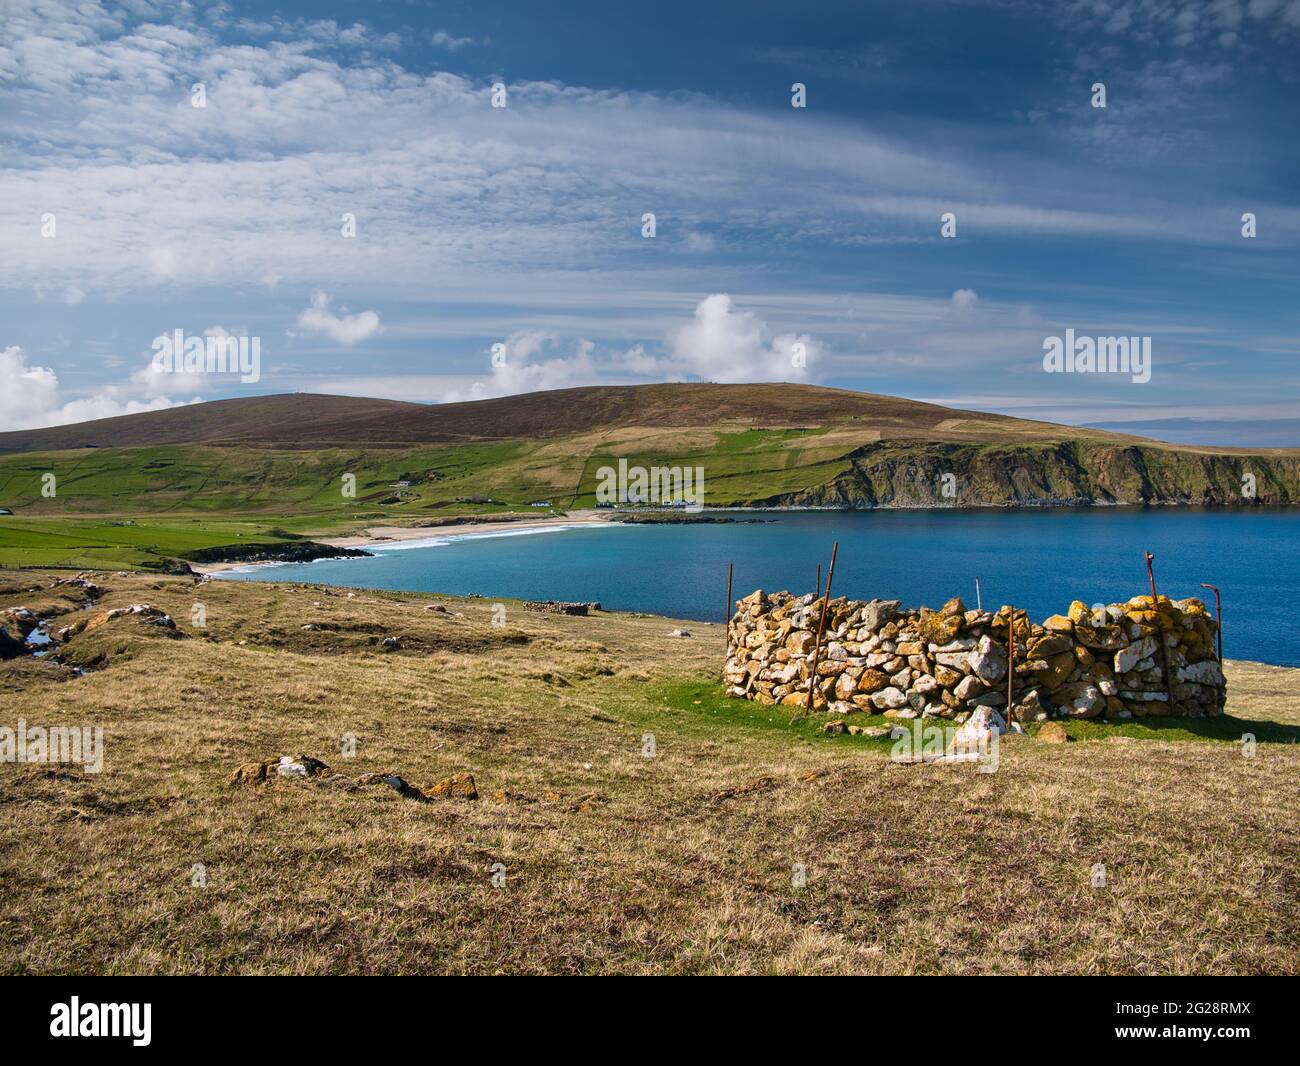 With sunshine on turquoise water and an old stone enclosure (a planticrub) on the right, the pristine, deserted Norwick beach in Shetland. Stock Photo